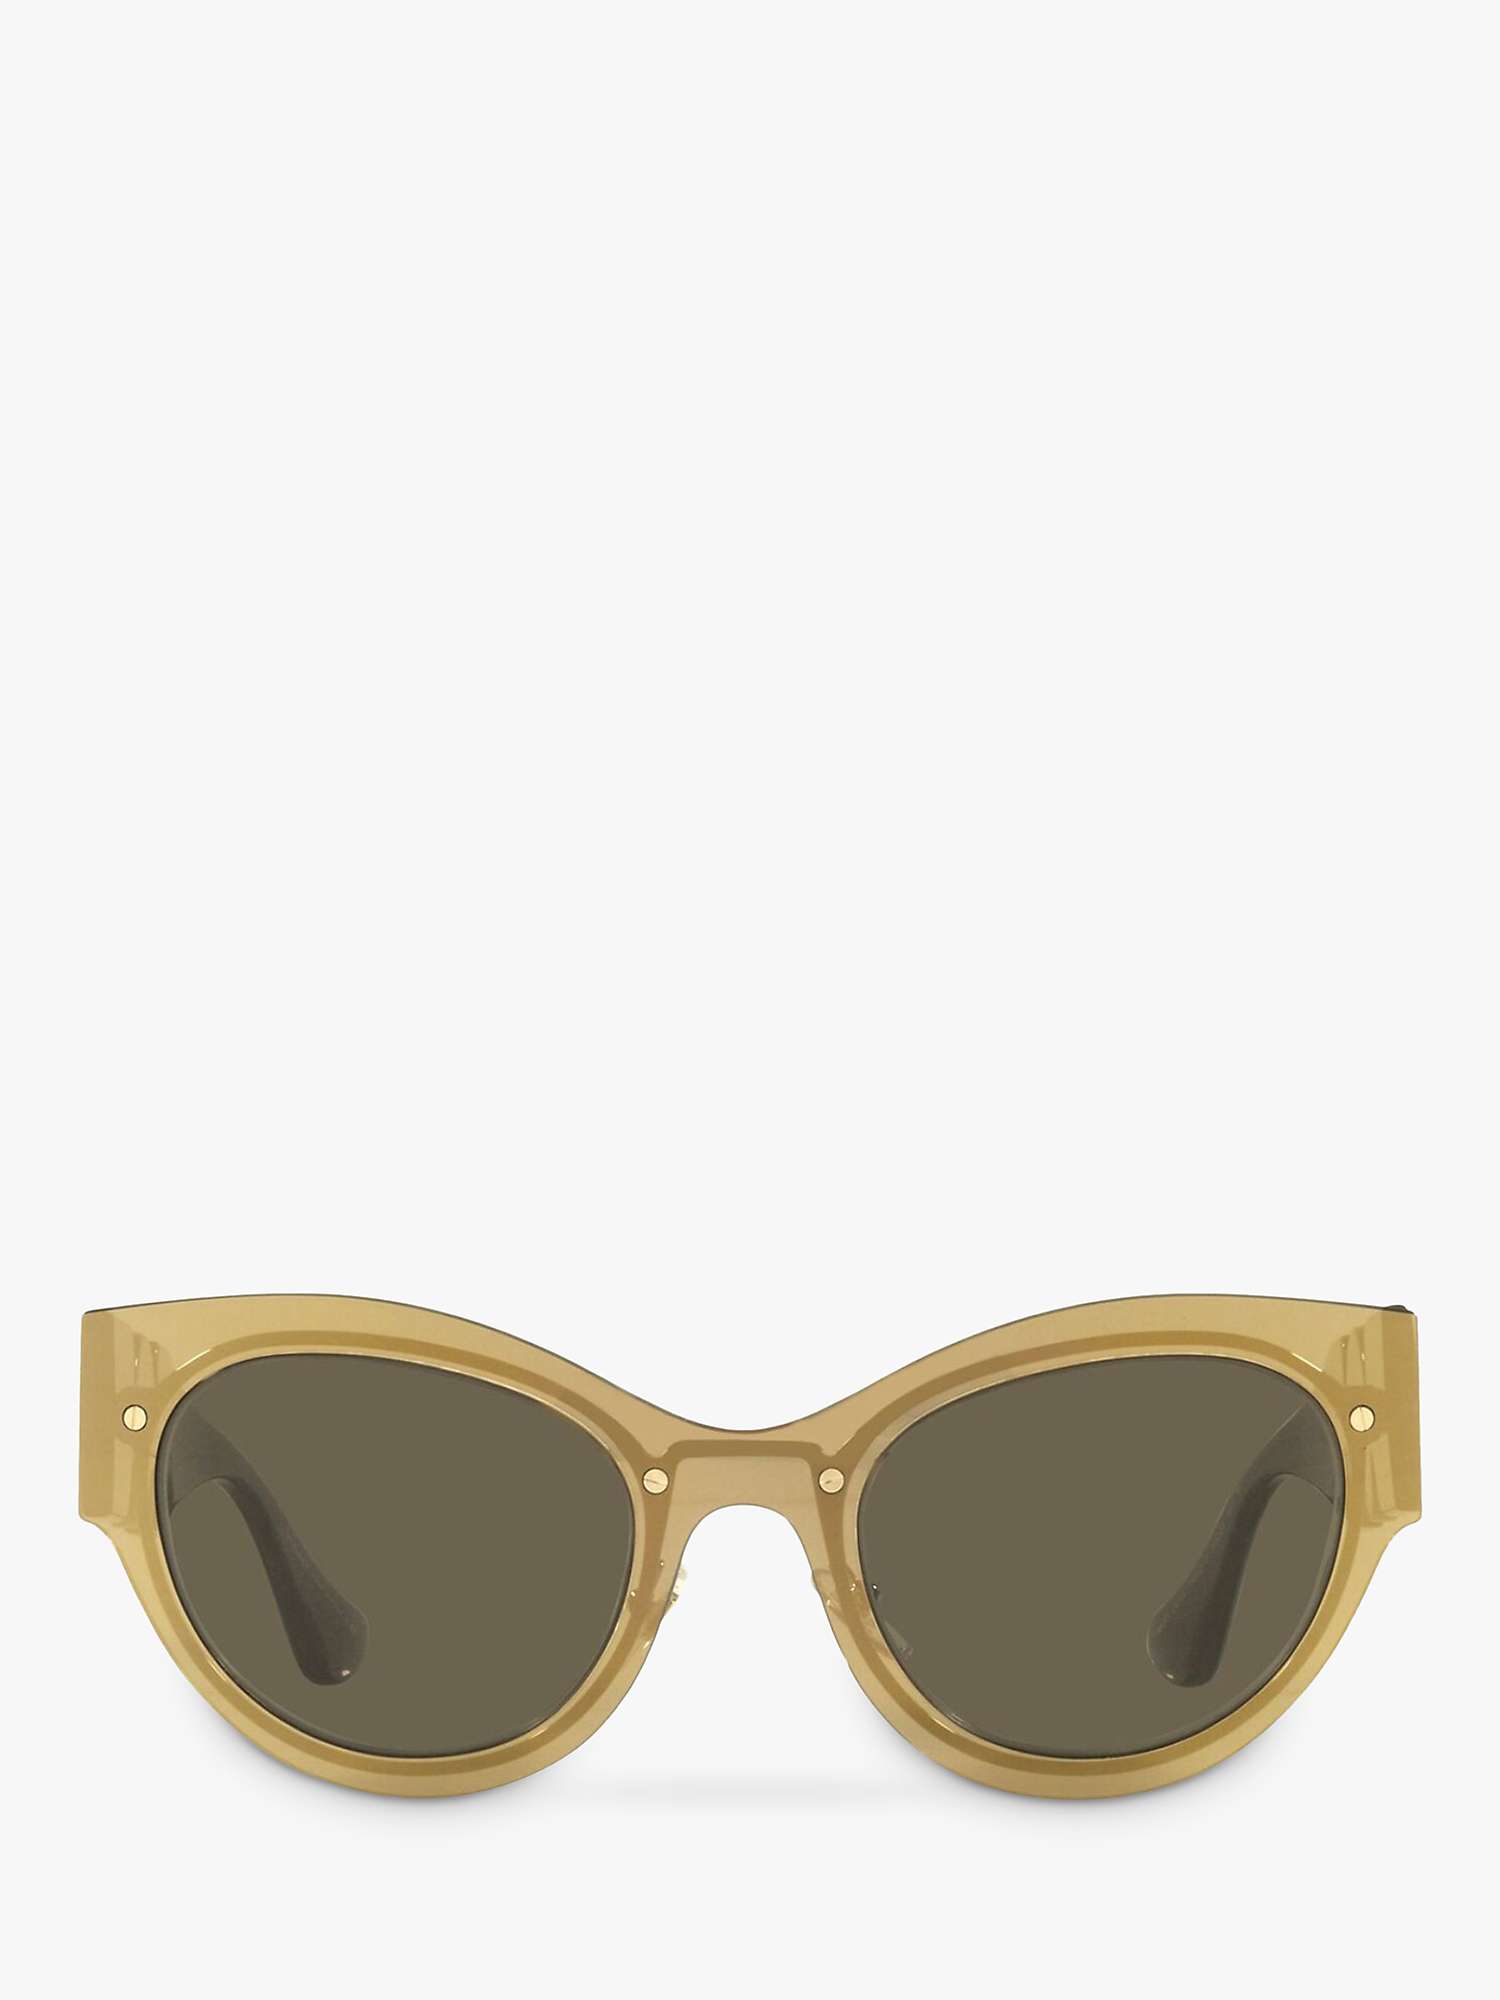 Buy Versace VE2234 Women's Butterfly Sunglasses, Transparent Brown/Mirror Gold Online at johnlewis.com